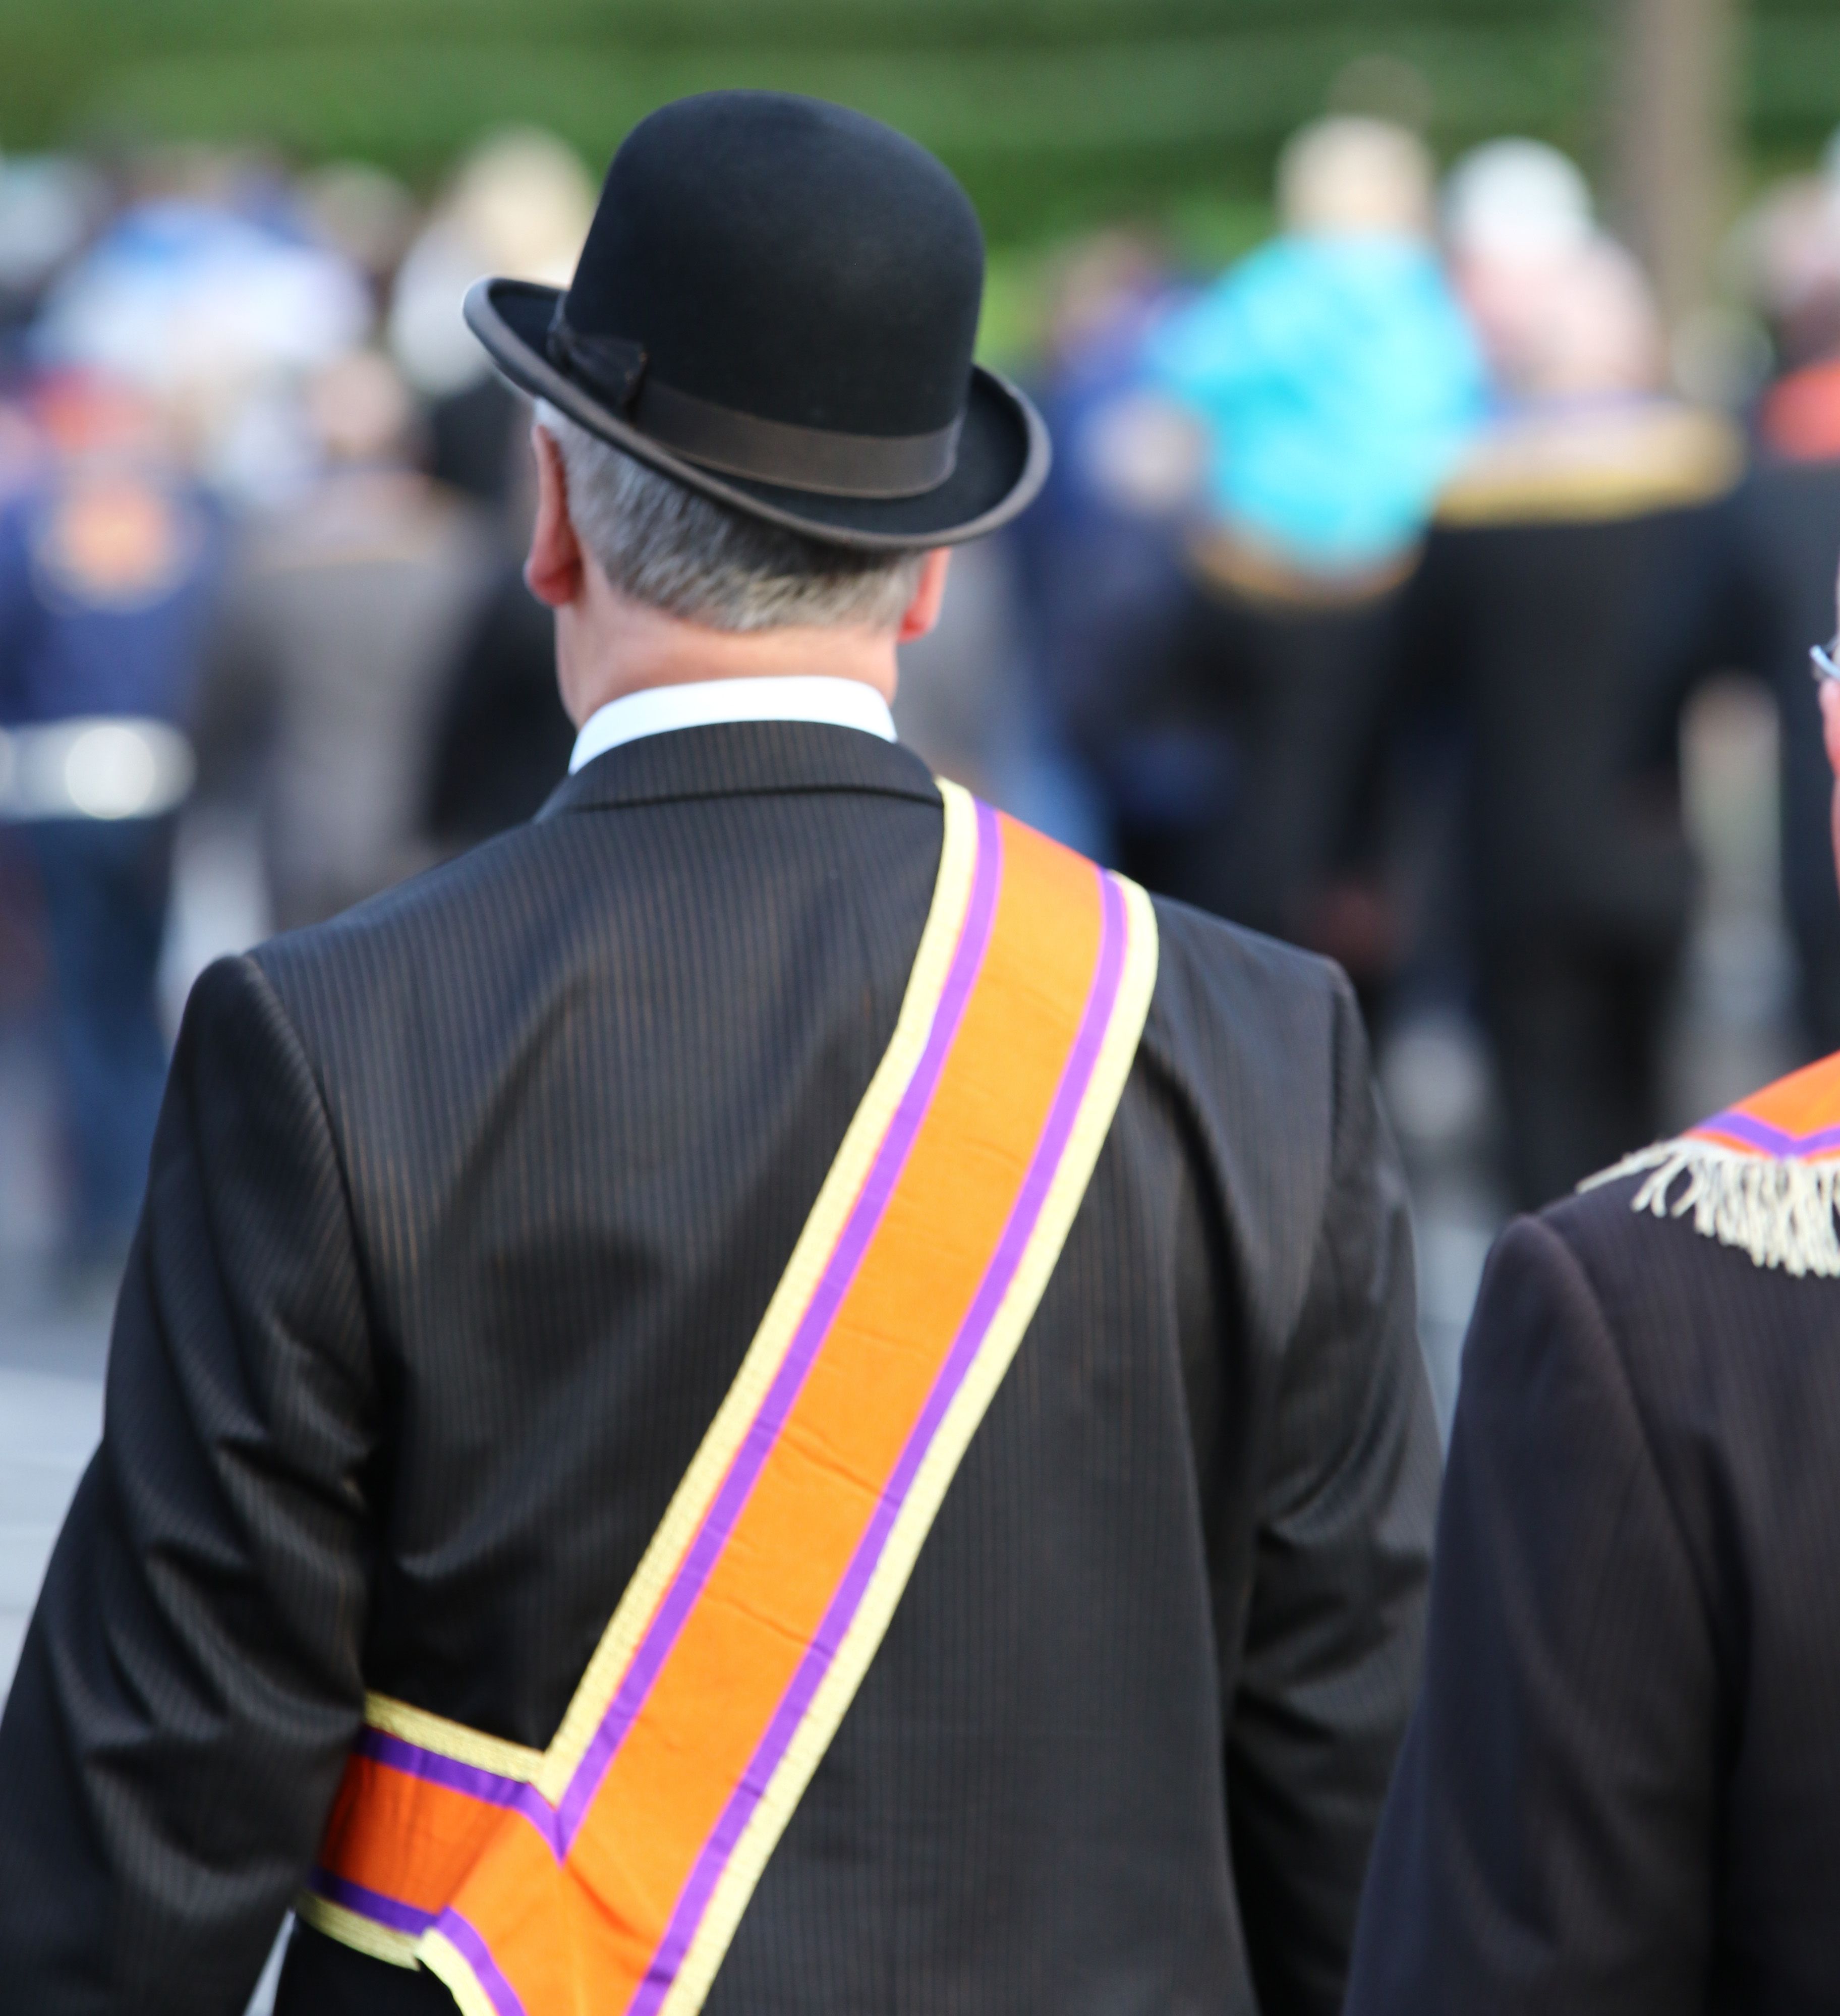 TENSION: The Parades Commission has rejected another Orange parade past Ardoyne